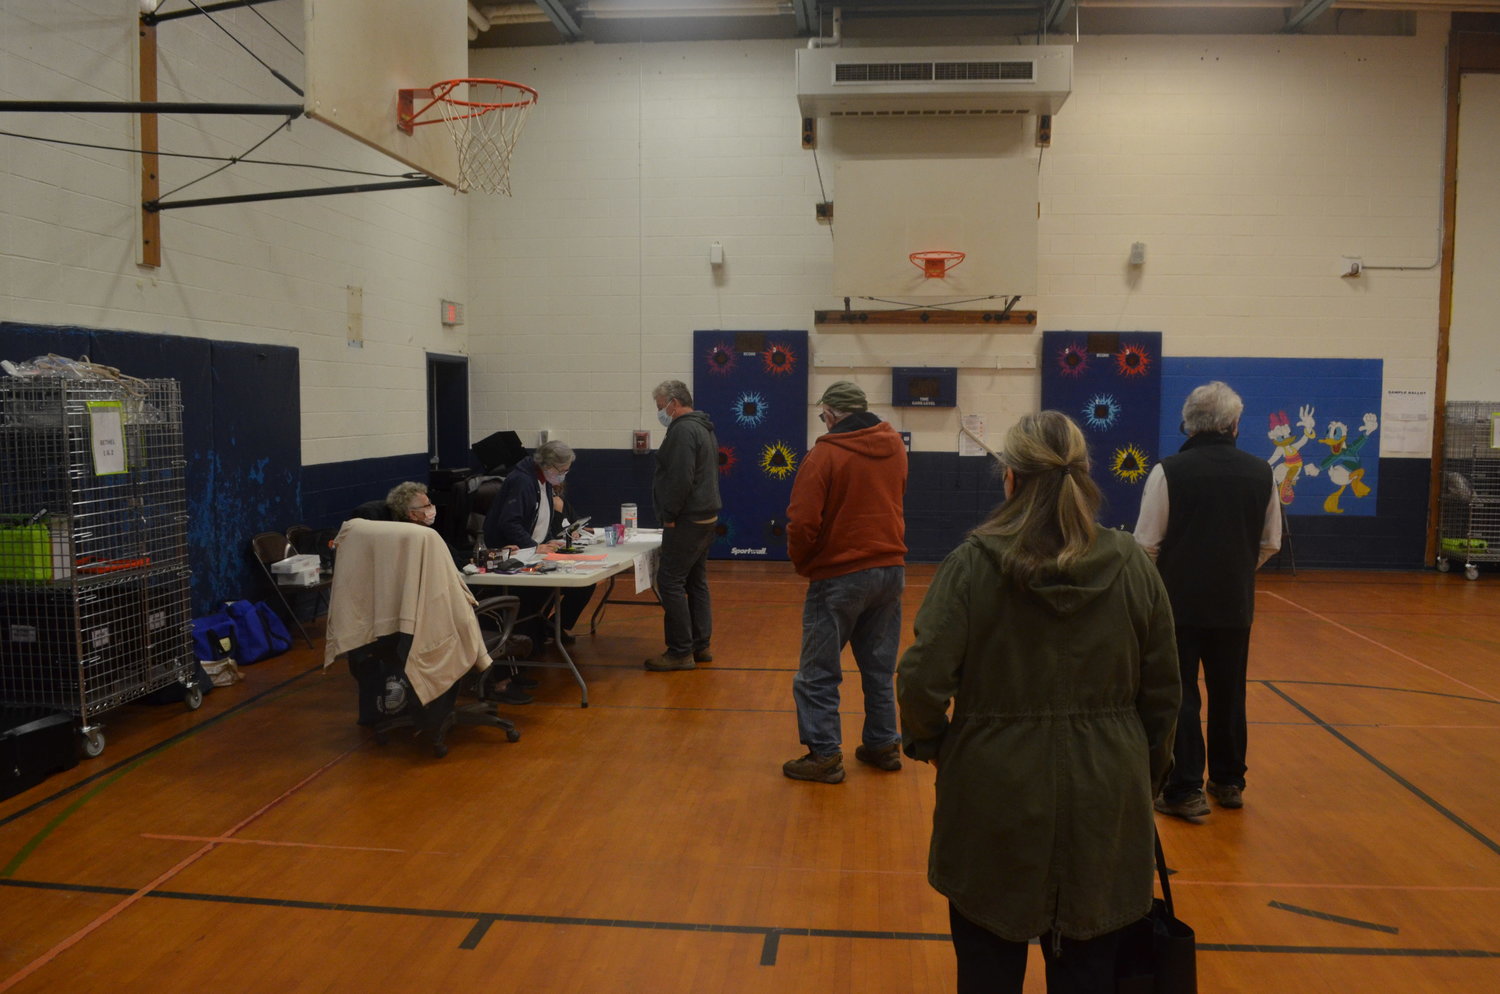 Voters line up at the Duggan Community Center in Bethel.